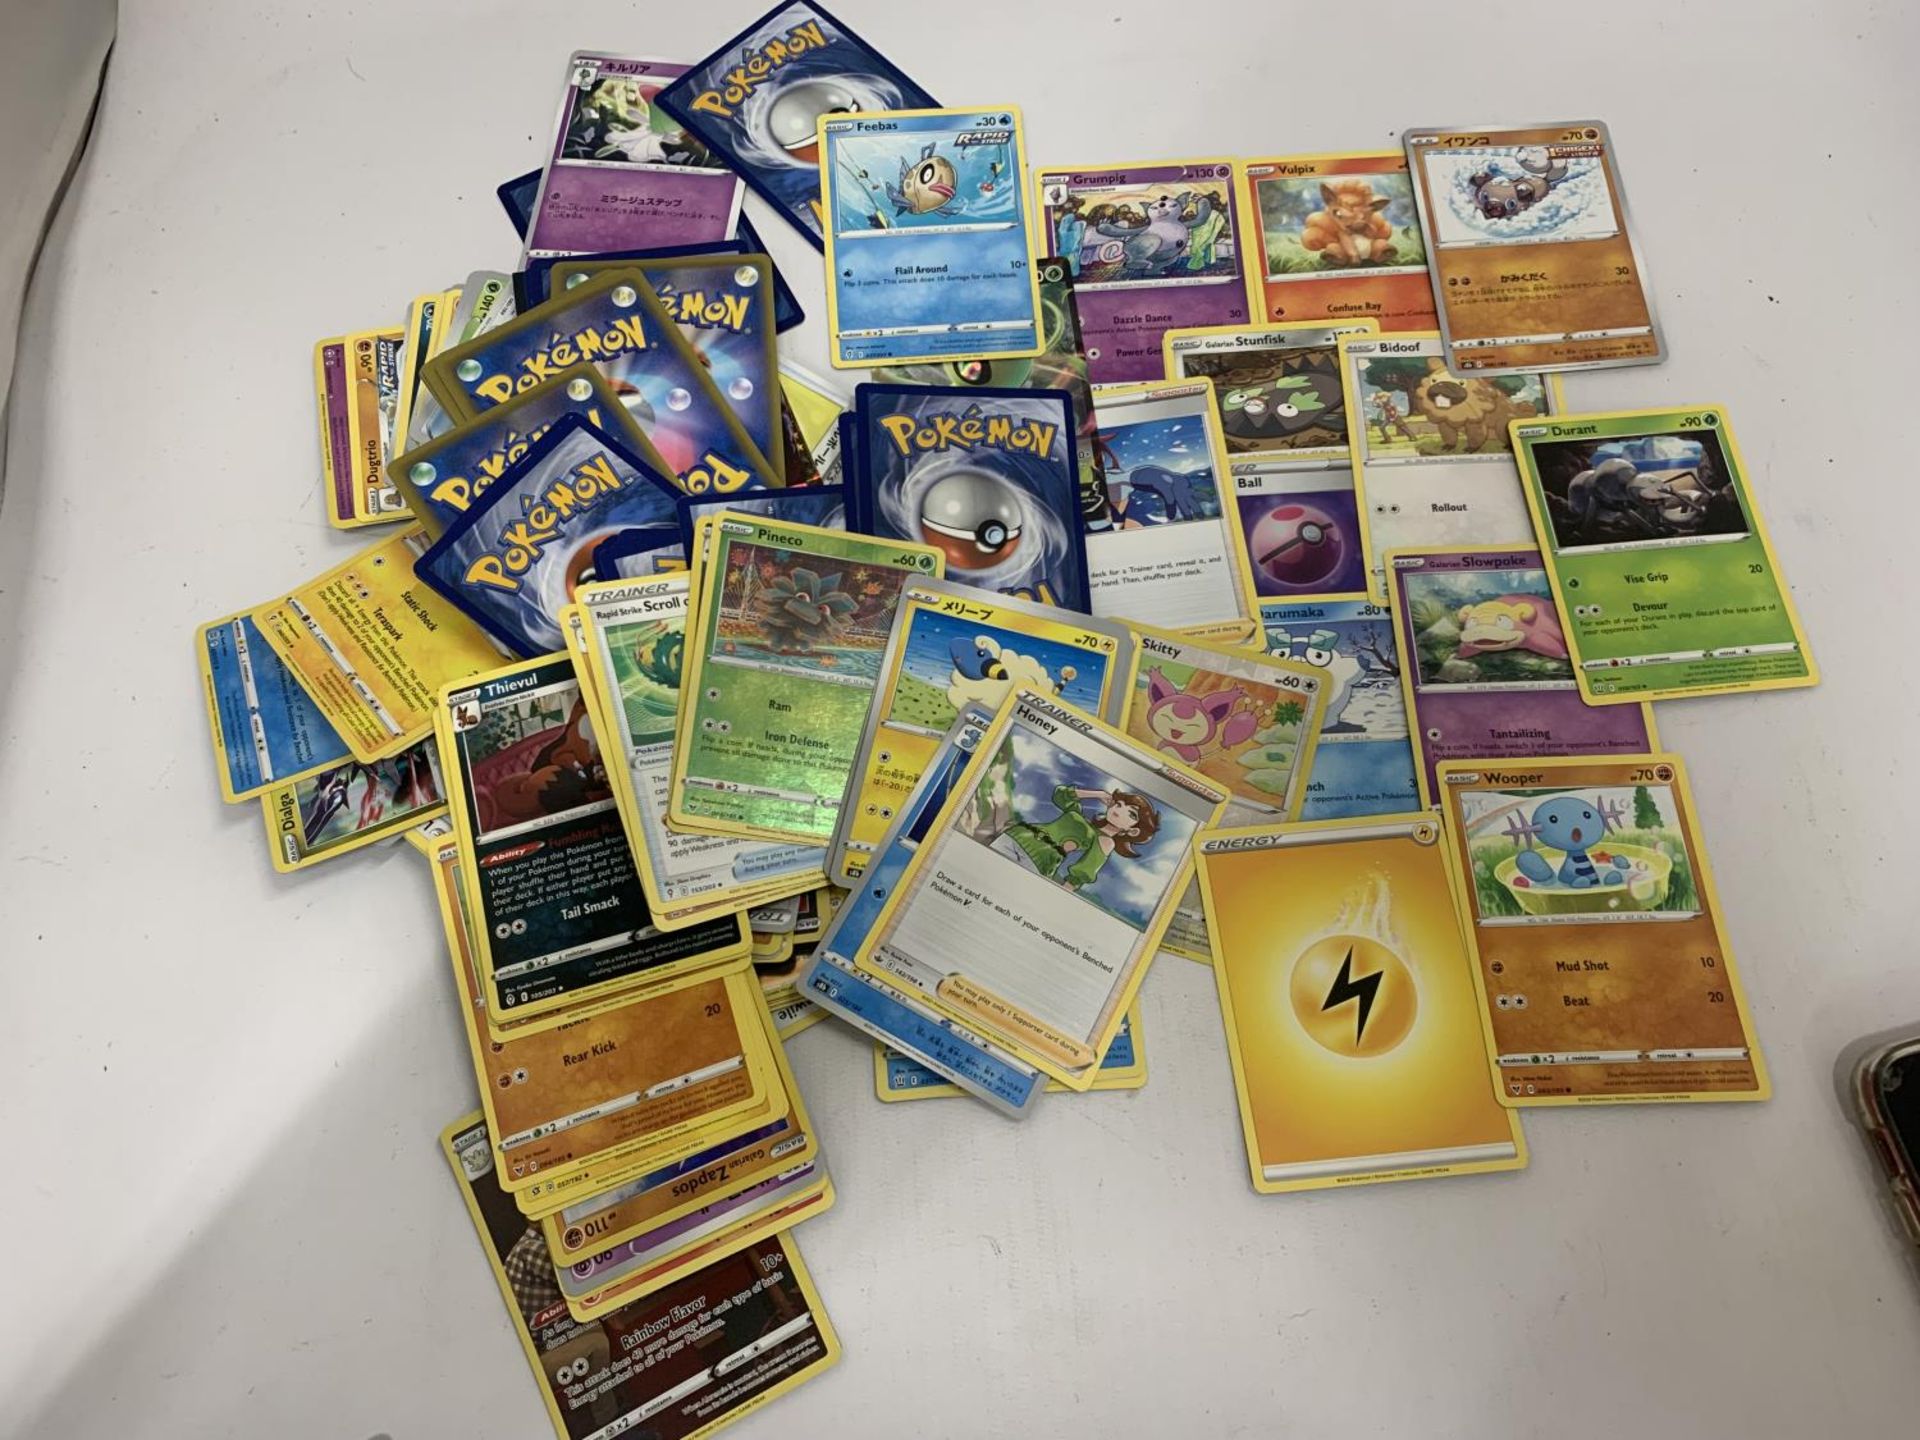 A LARGE QUANTITY OF POKEMON CARDS - APPROX 164